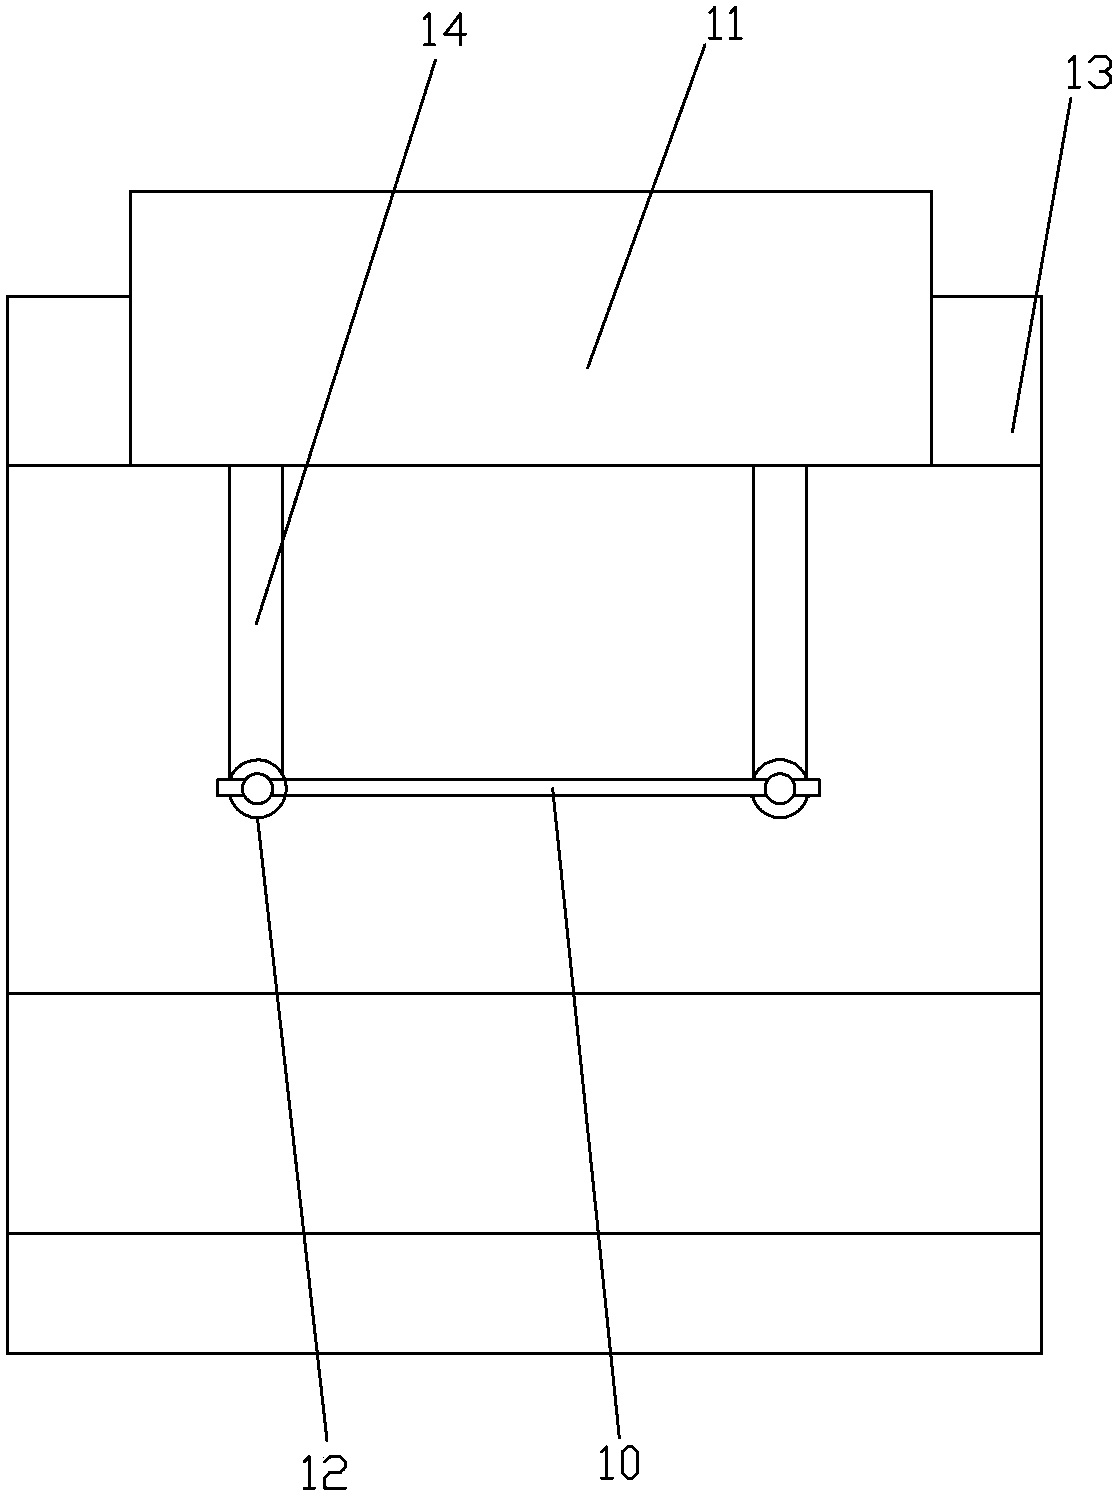 Clothes rack capable of stretching and retracting automatically